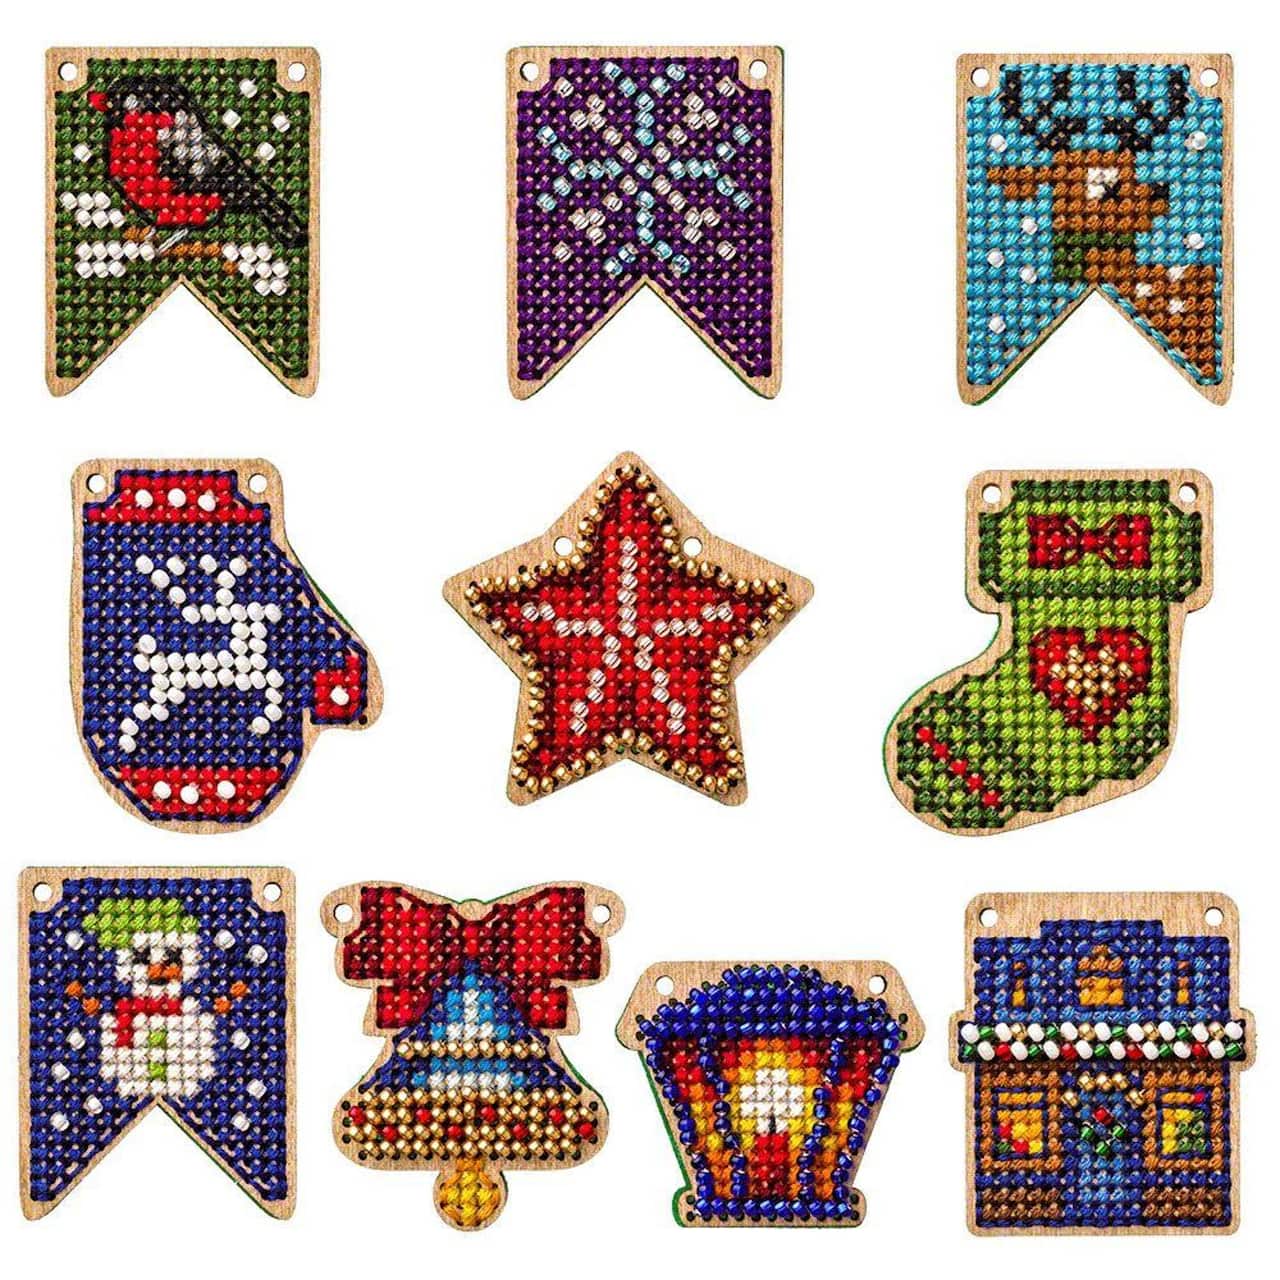 Wonderland Crafts 20 Piece Christmas Wooden Embroidery Blanks